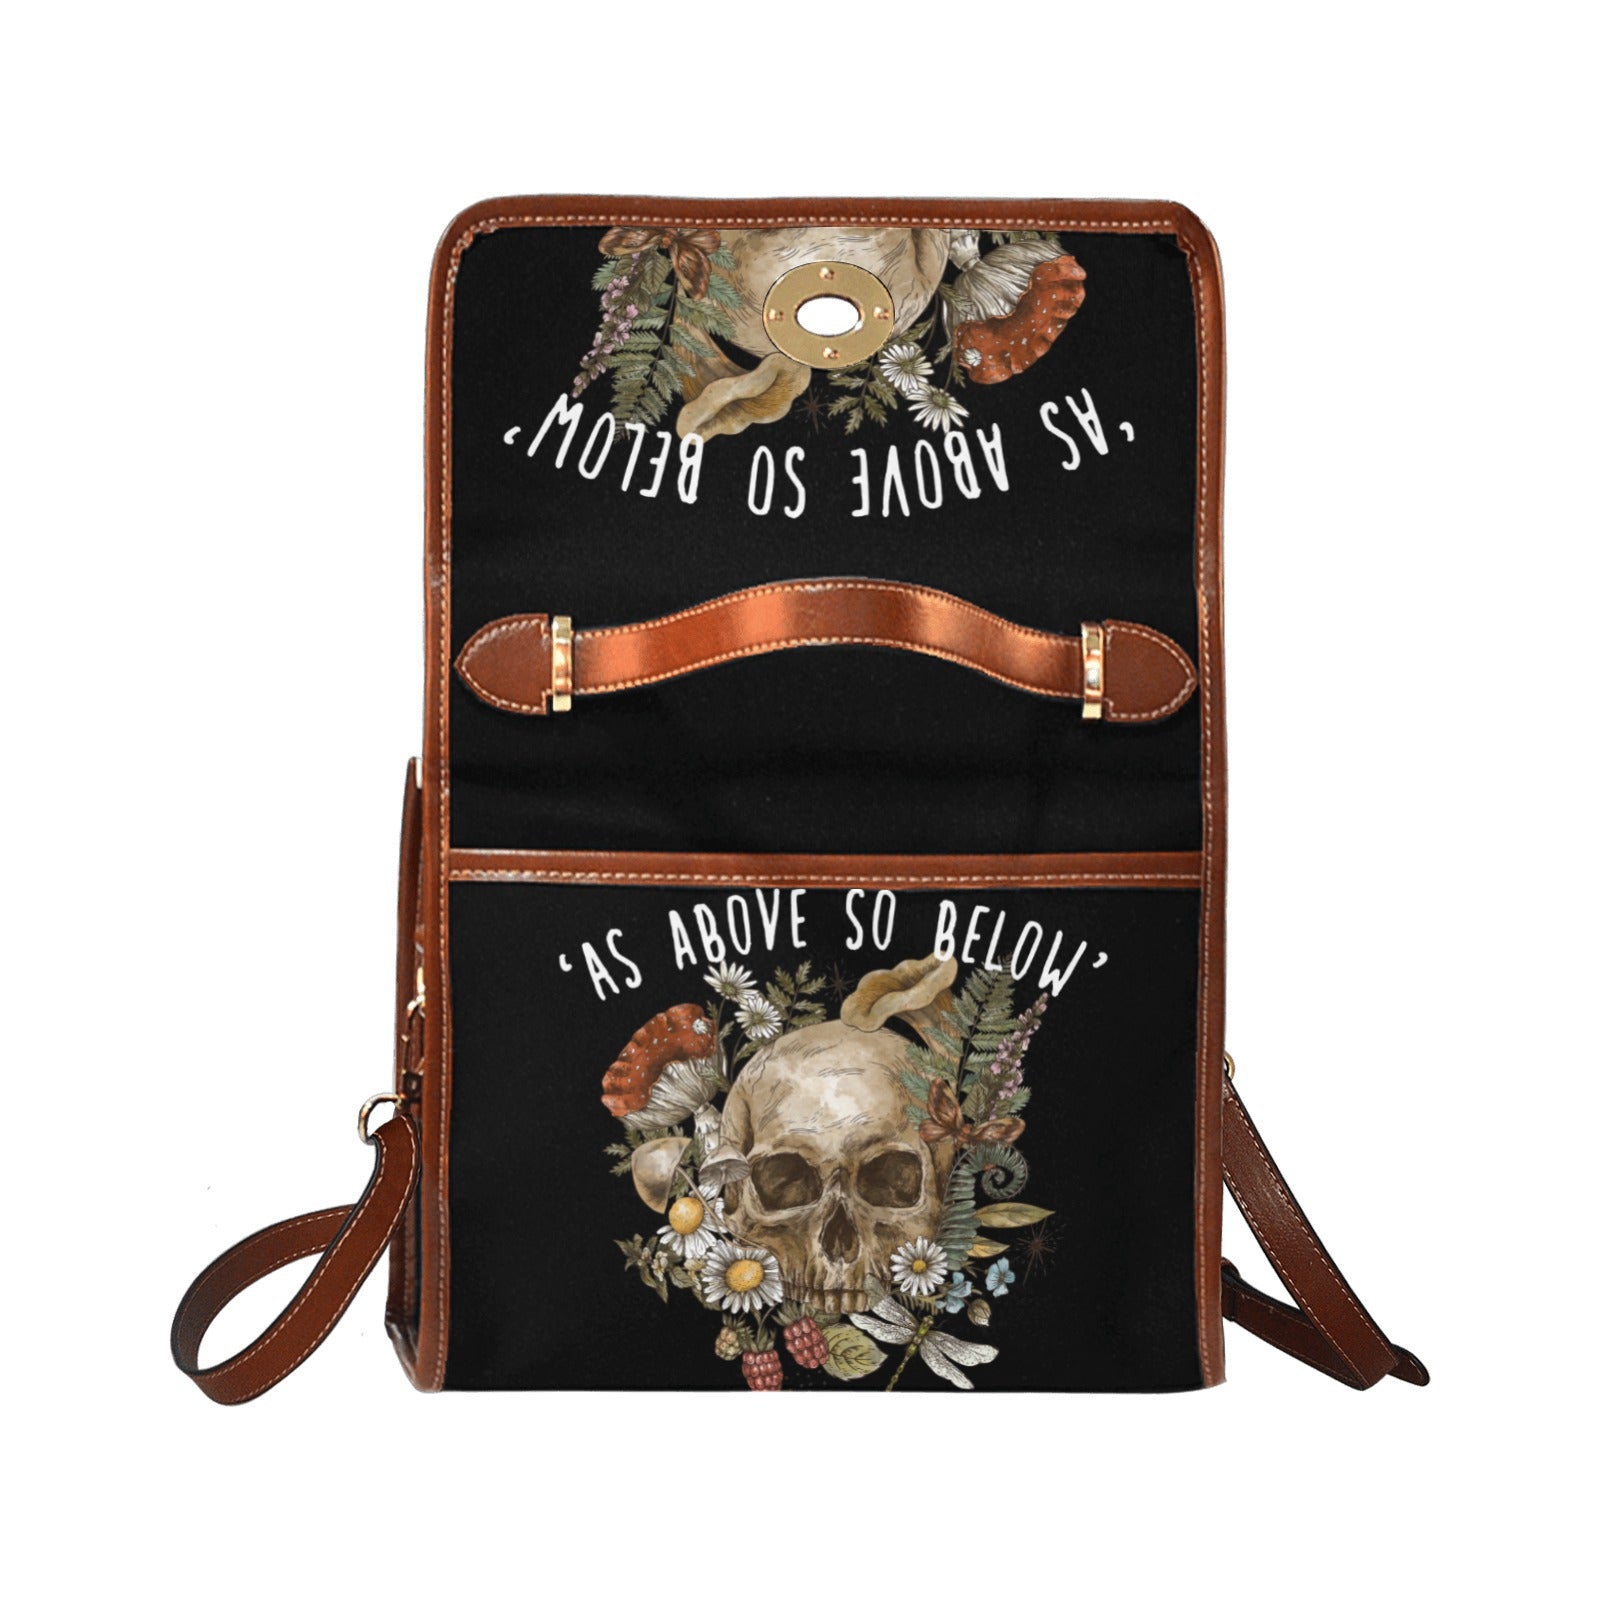 As Above So Below Forest Skull witchy goth Canvas Satchel Bag